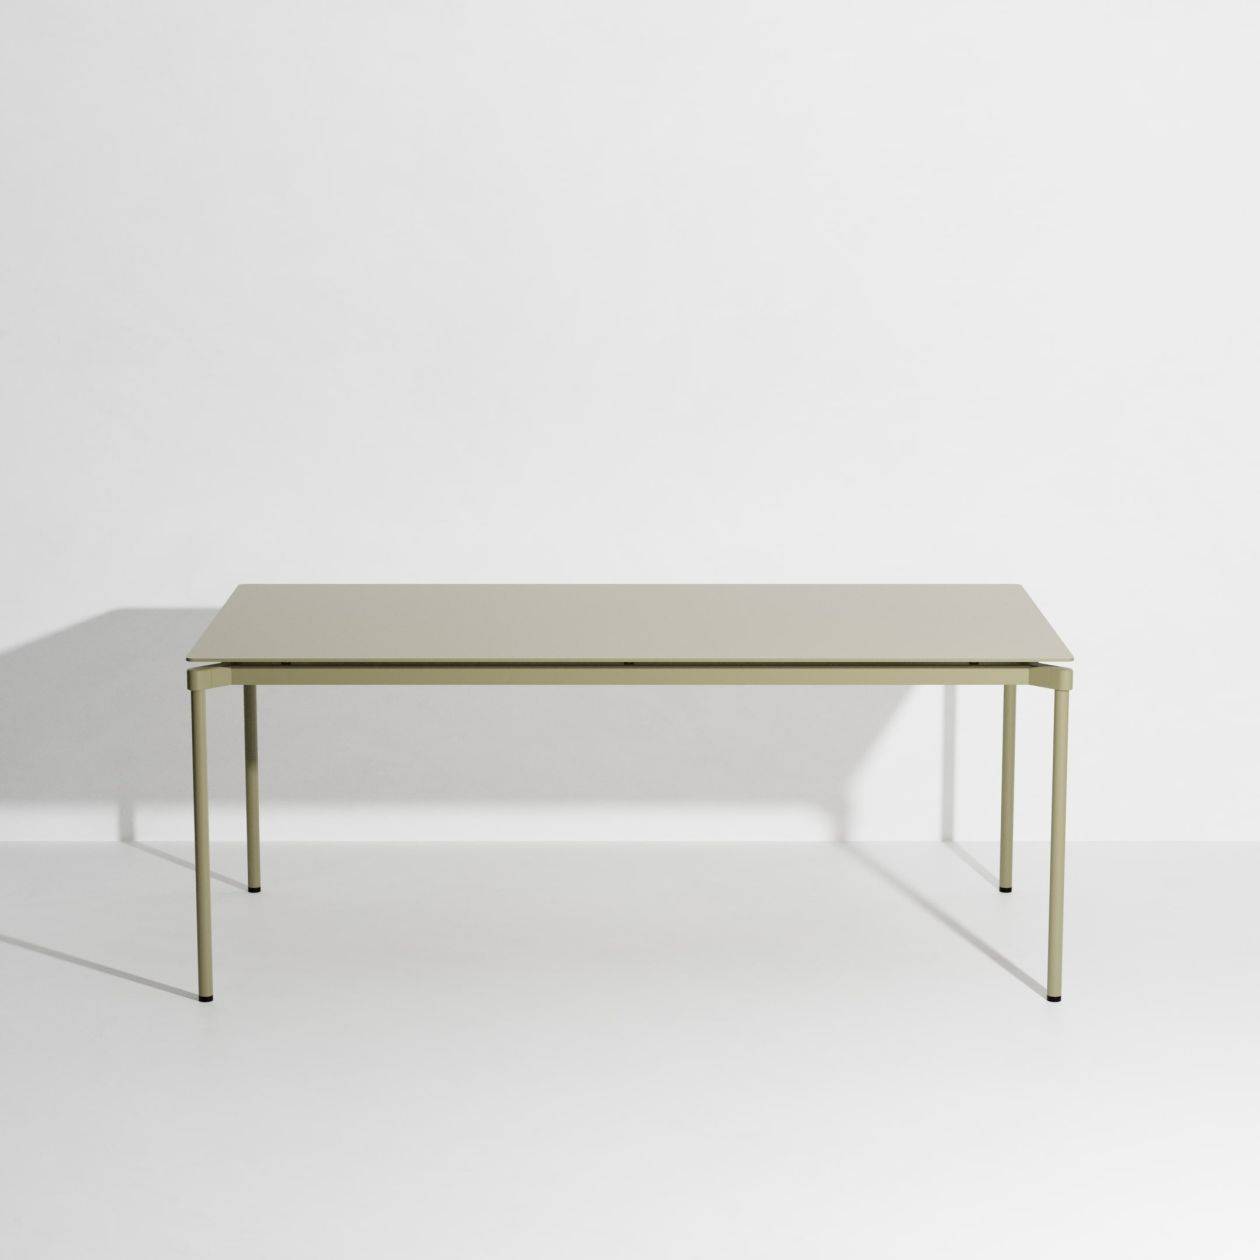 Fromme Rectangular Table - Jade green